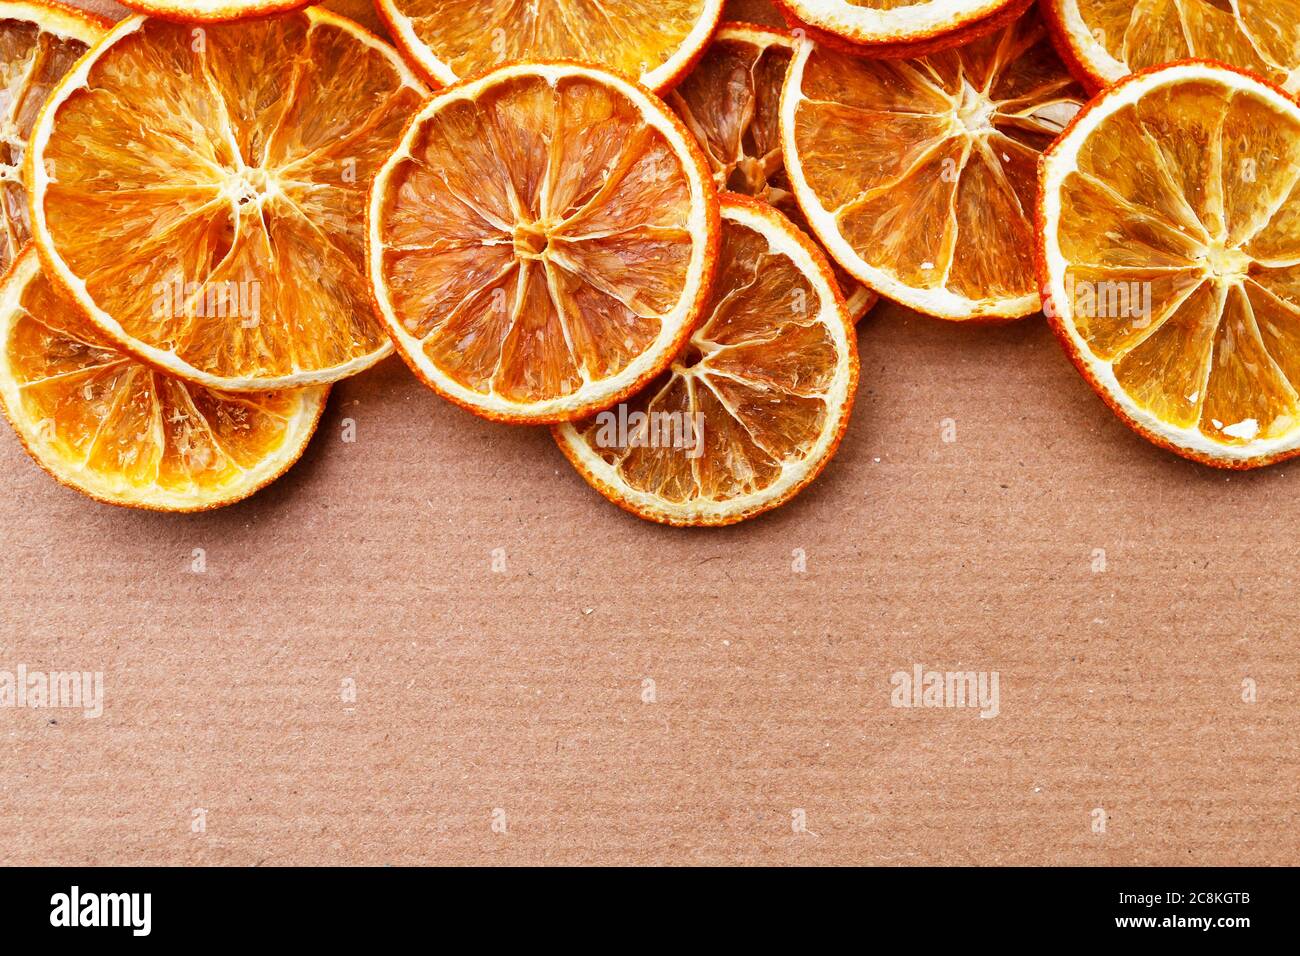 A sliced dry oranges on paper background, copy space. Stock Photo